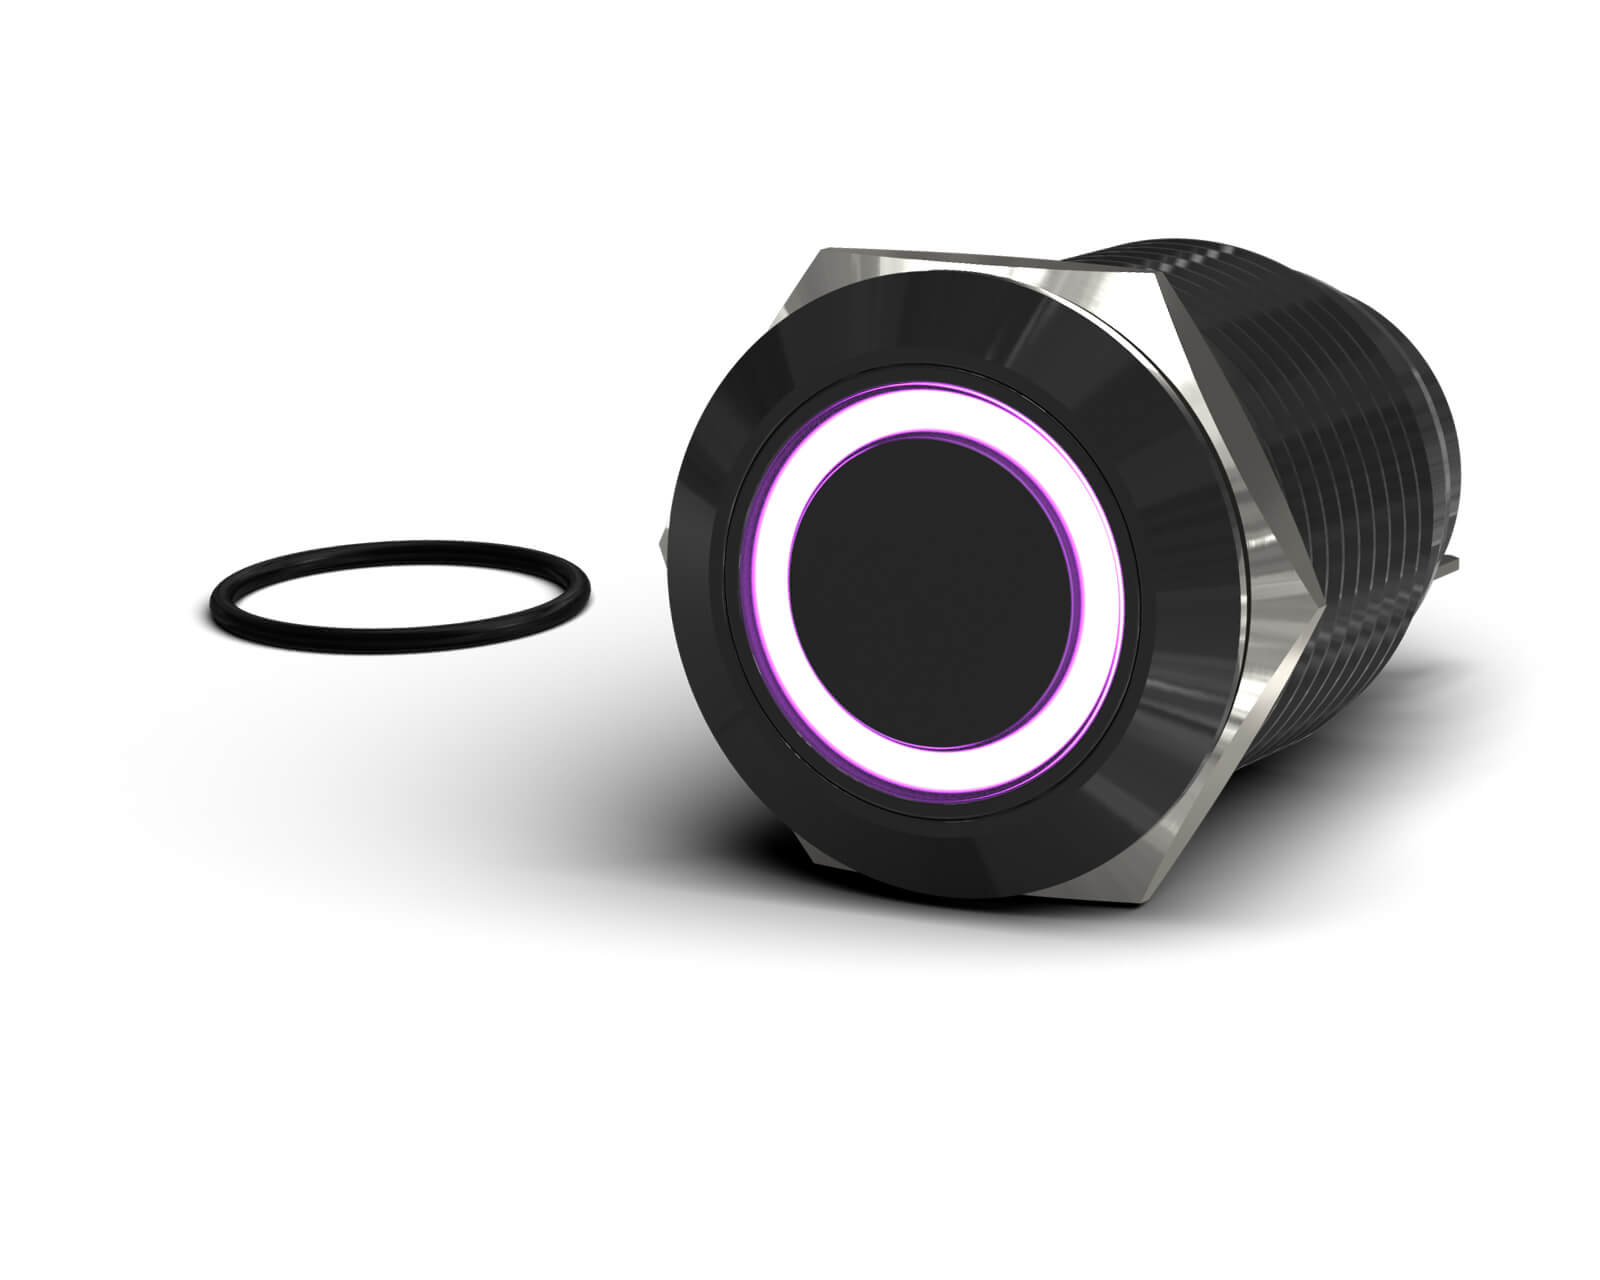 PrimoChill Black Aluminum Momentary Vandal Resistant Switch - 22mm - PrimoChill - KEEPING IT COOL Purple LED Ring